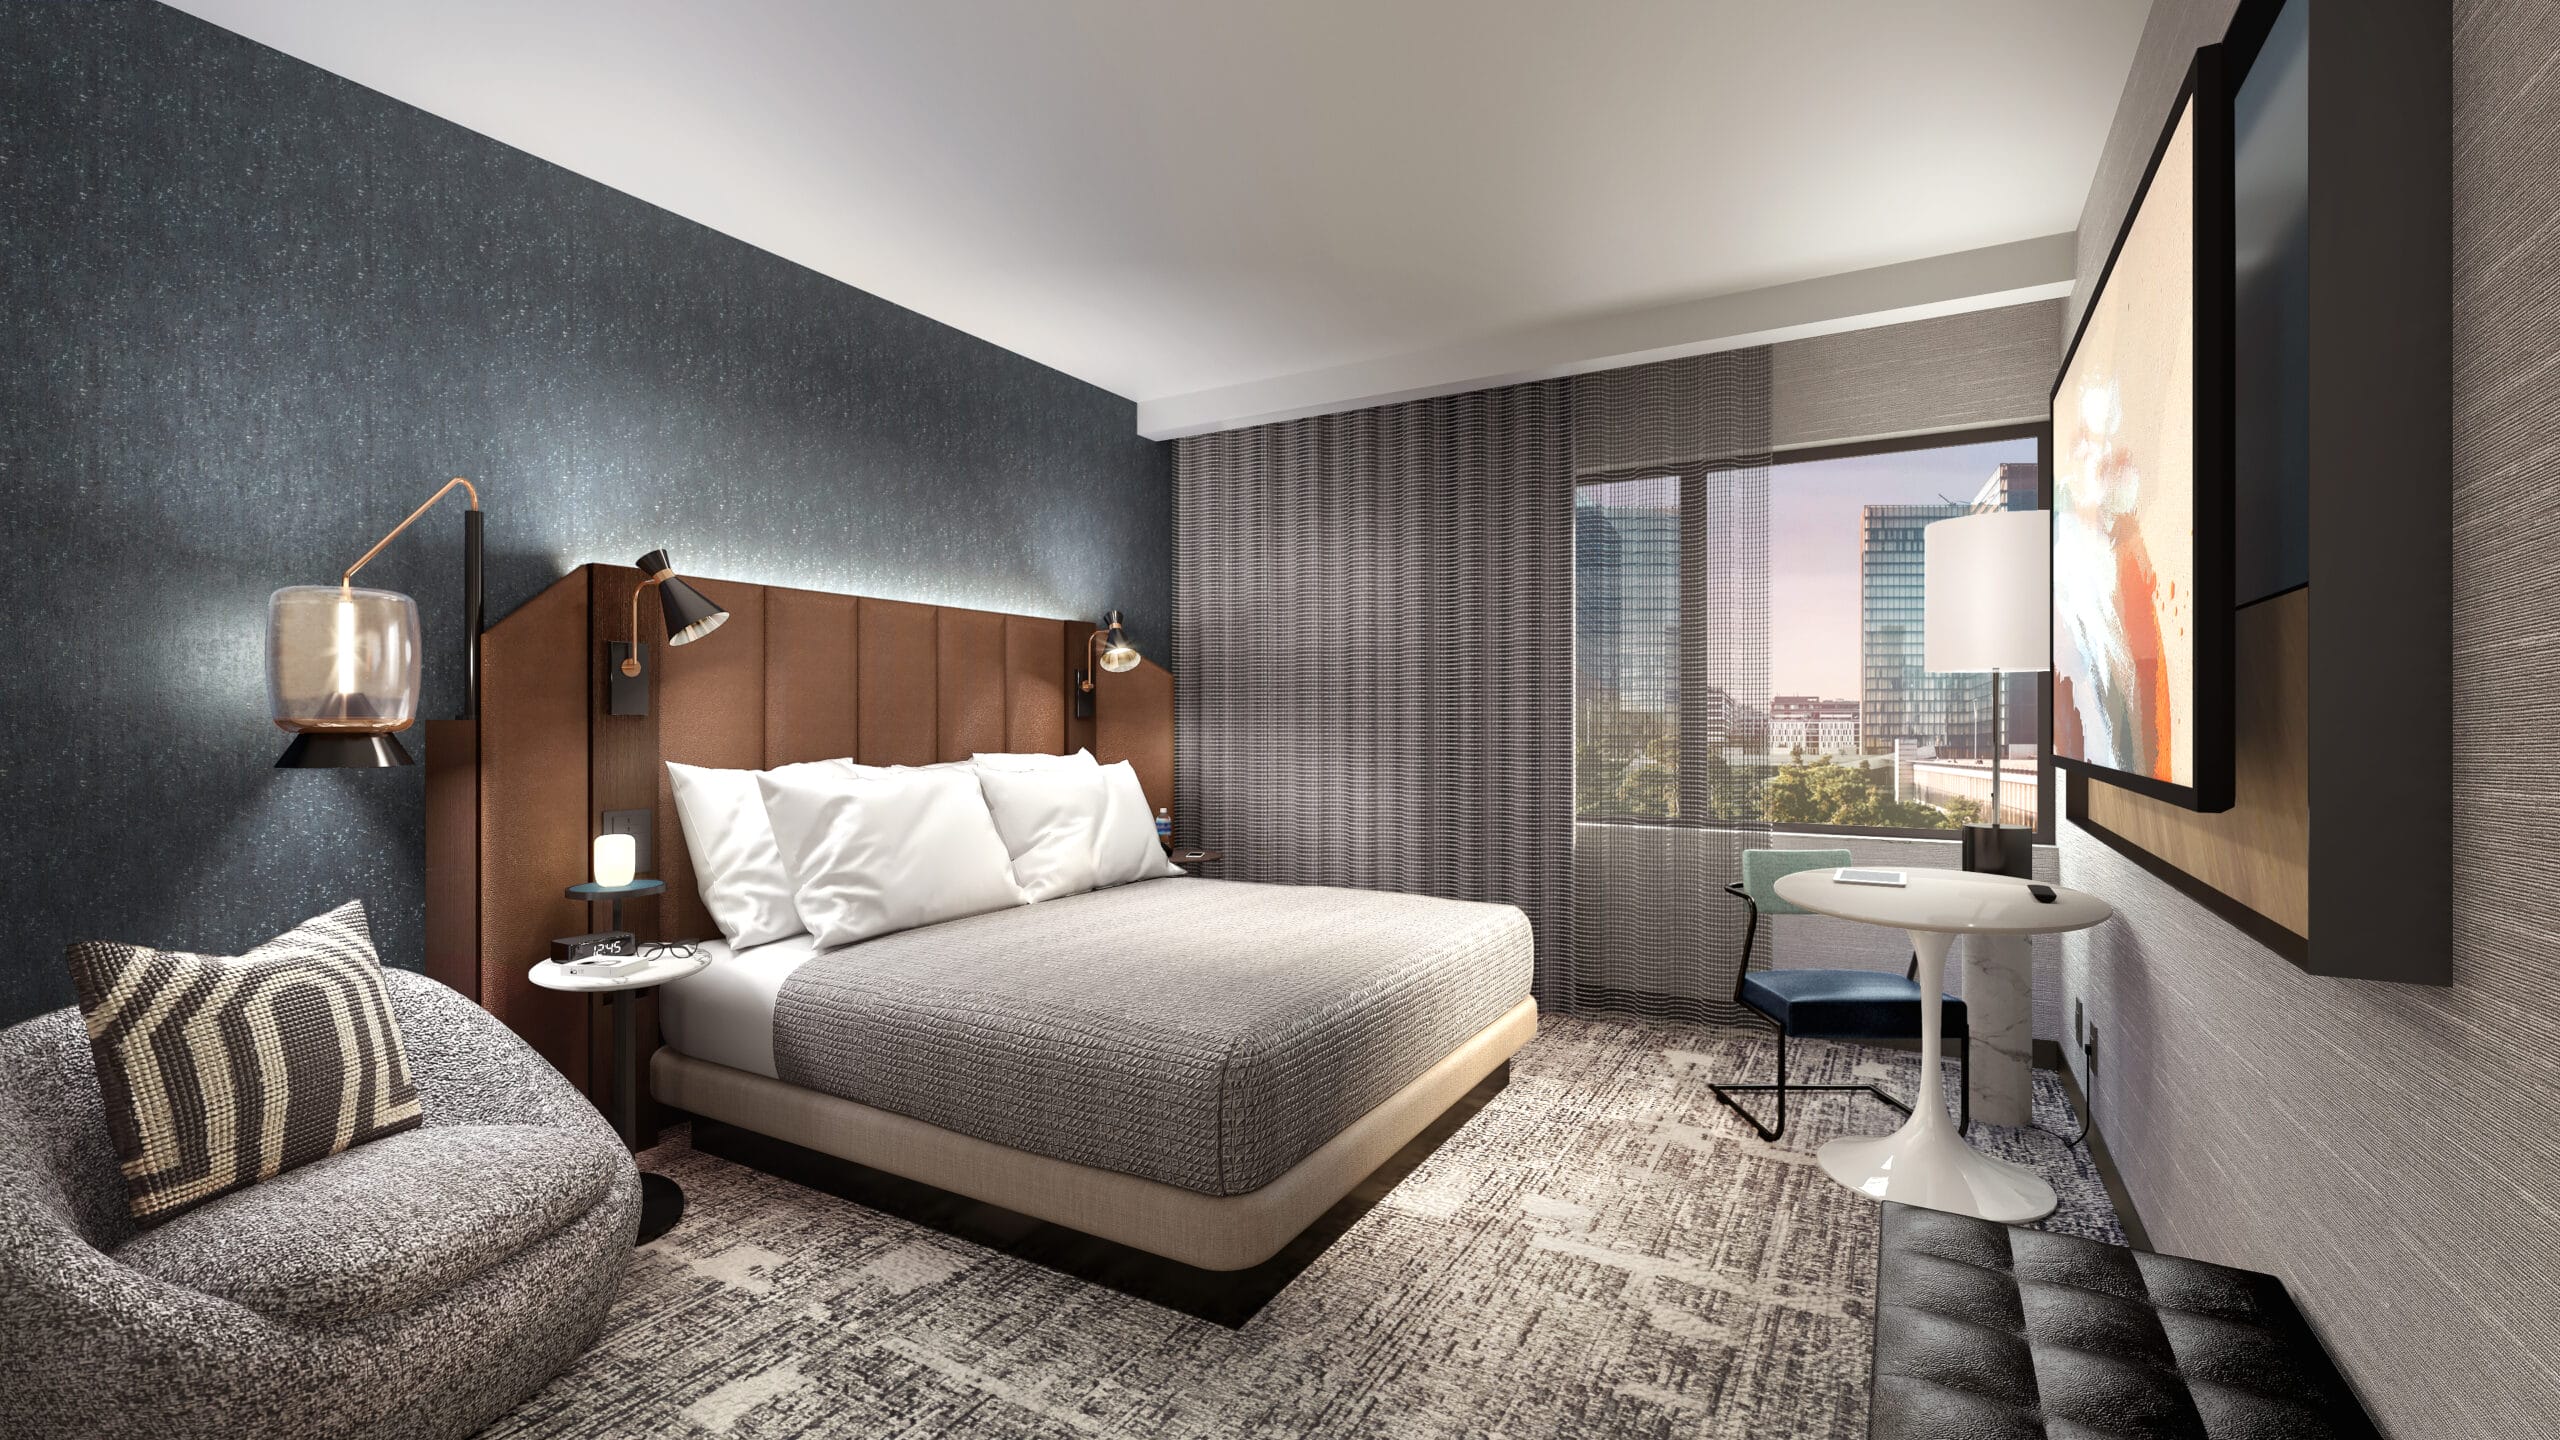 Tempo by Hilton King Room rendering